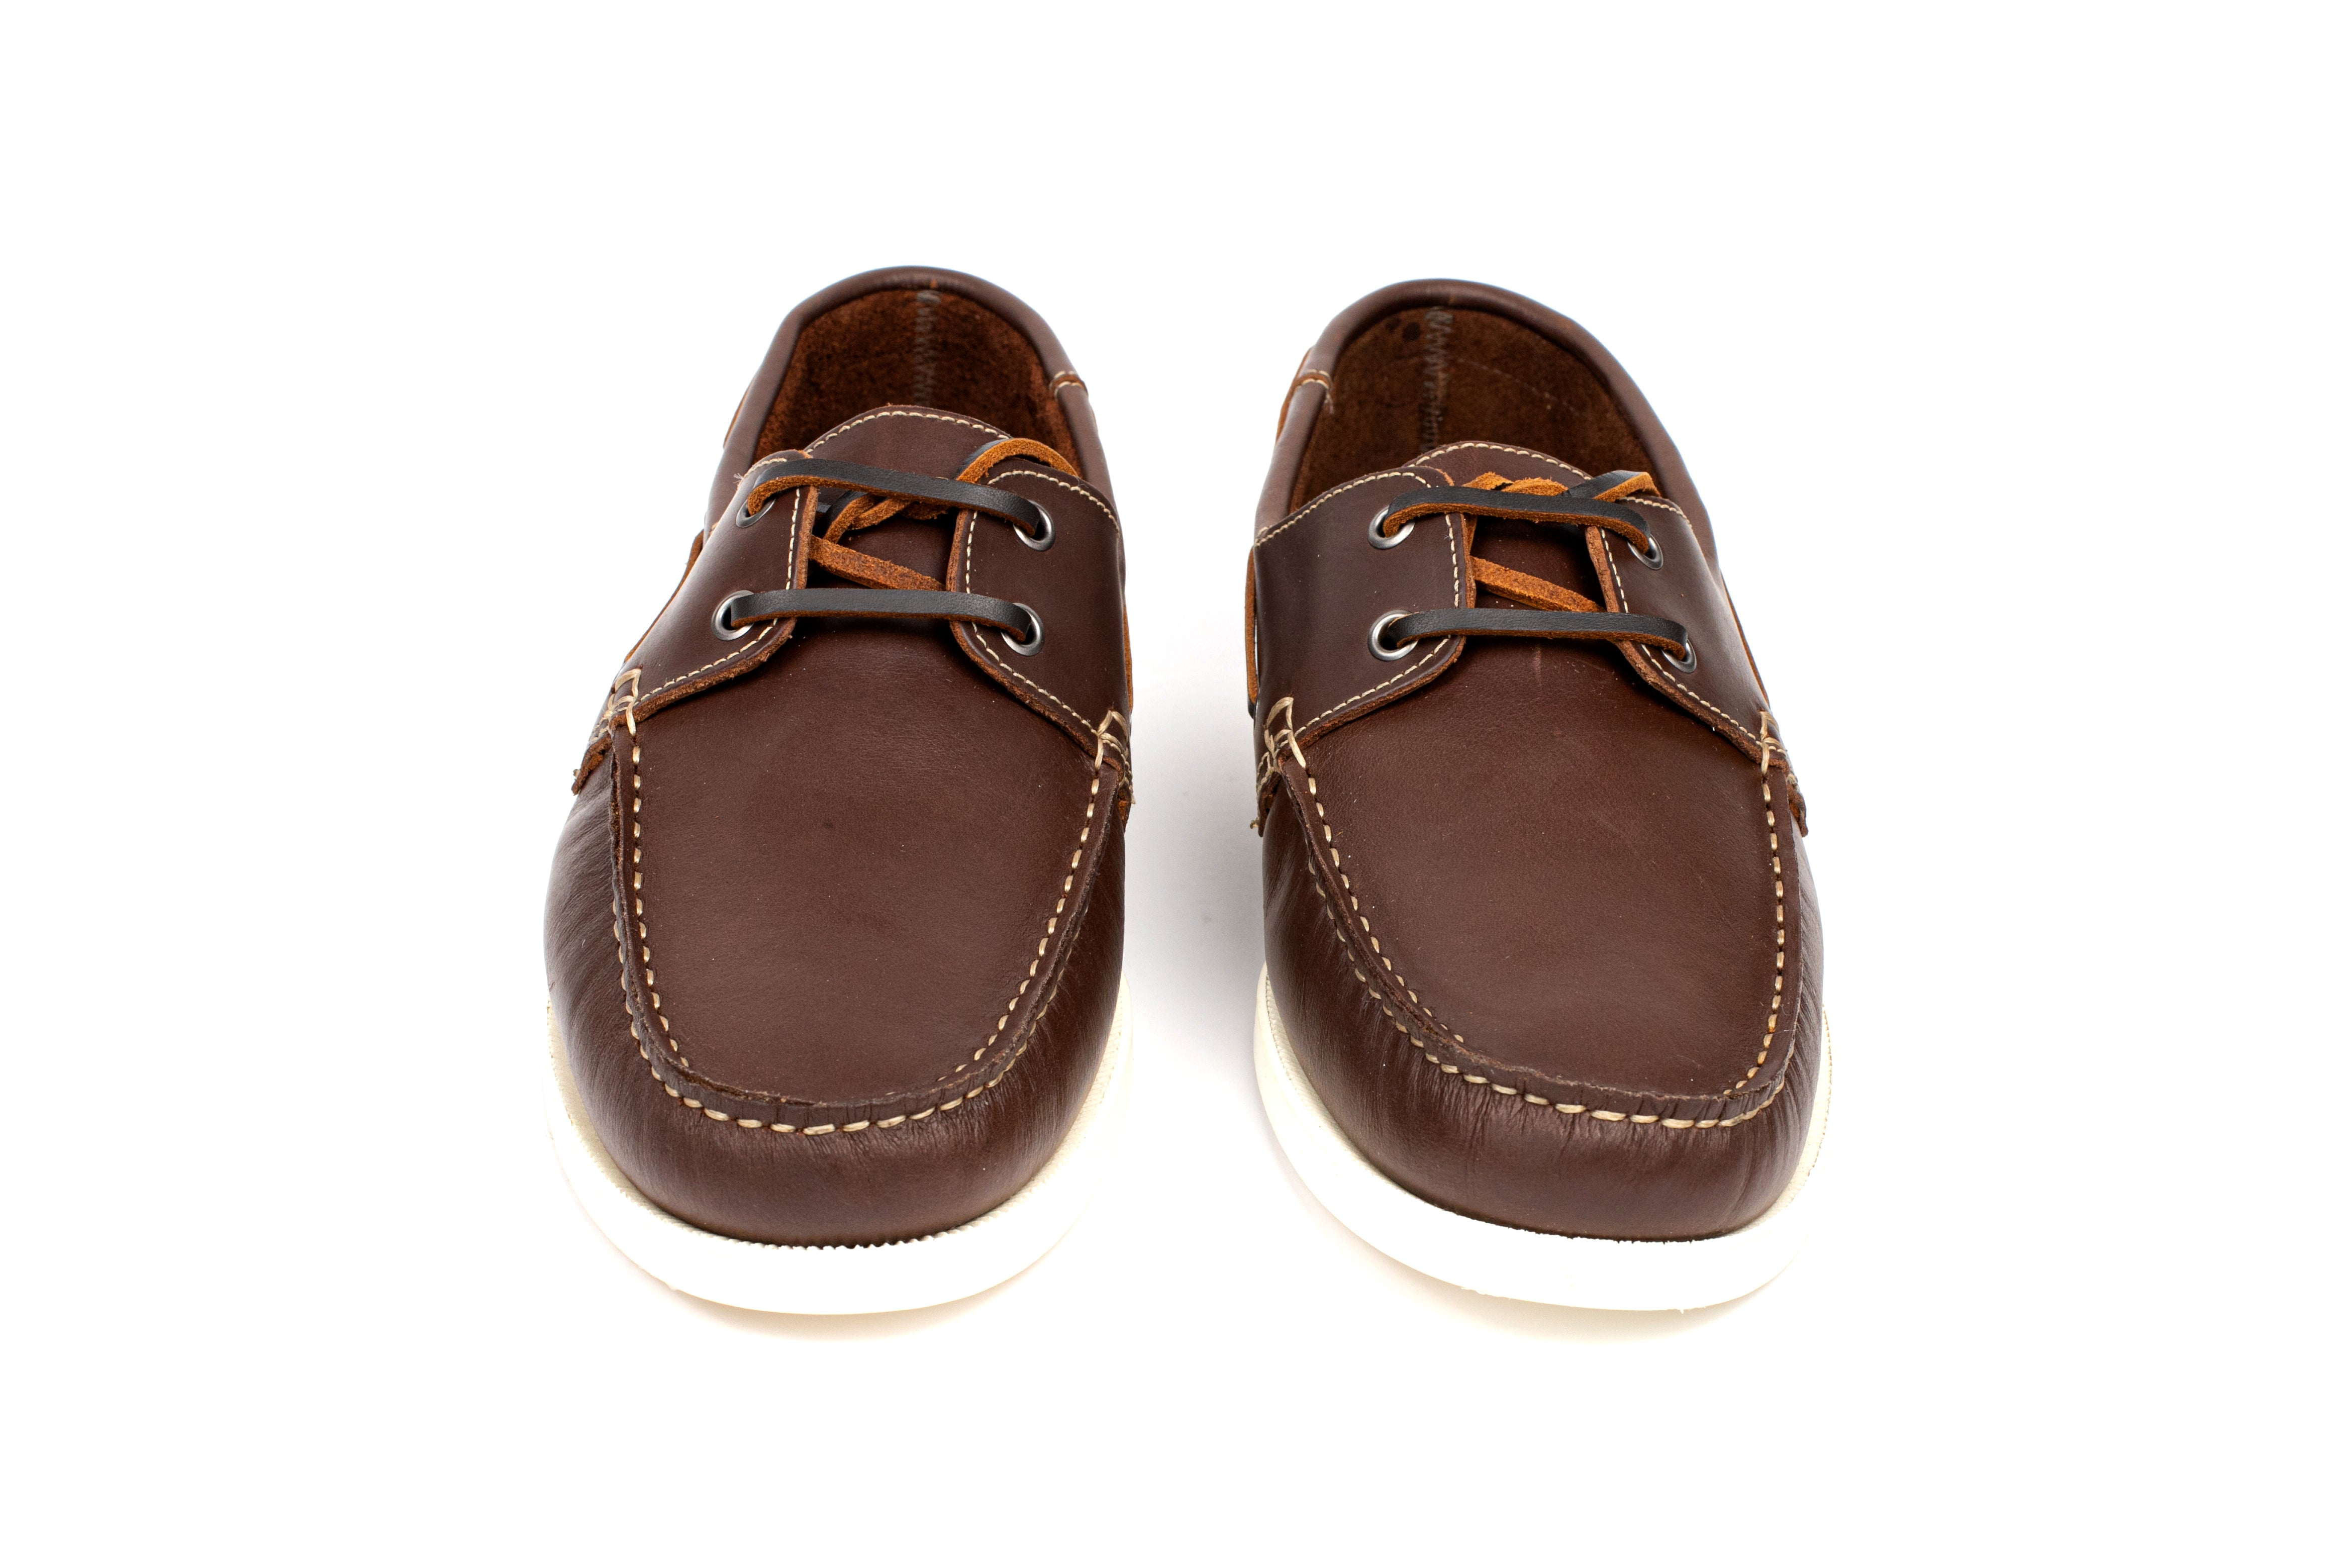 DockSider - Tobacco color with White sole